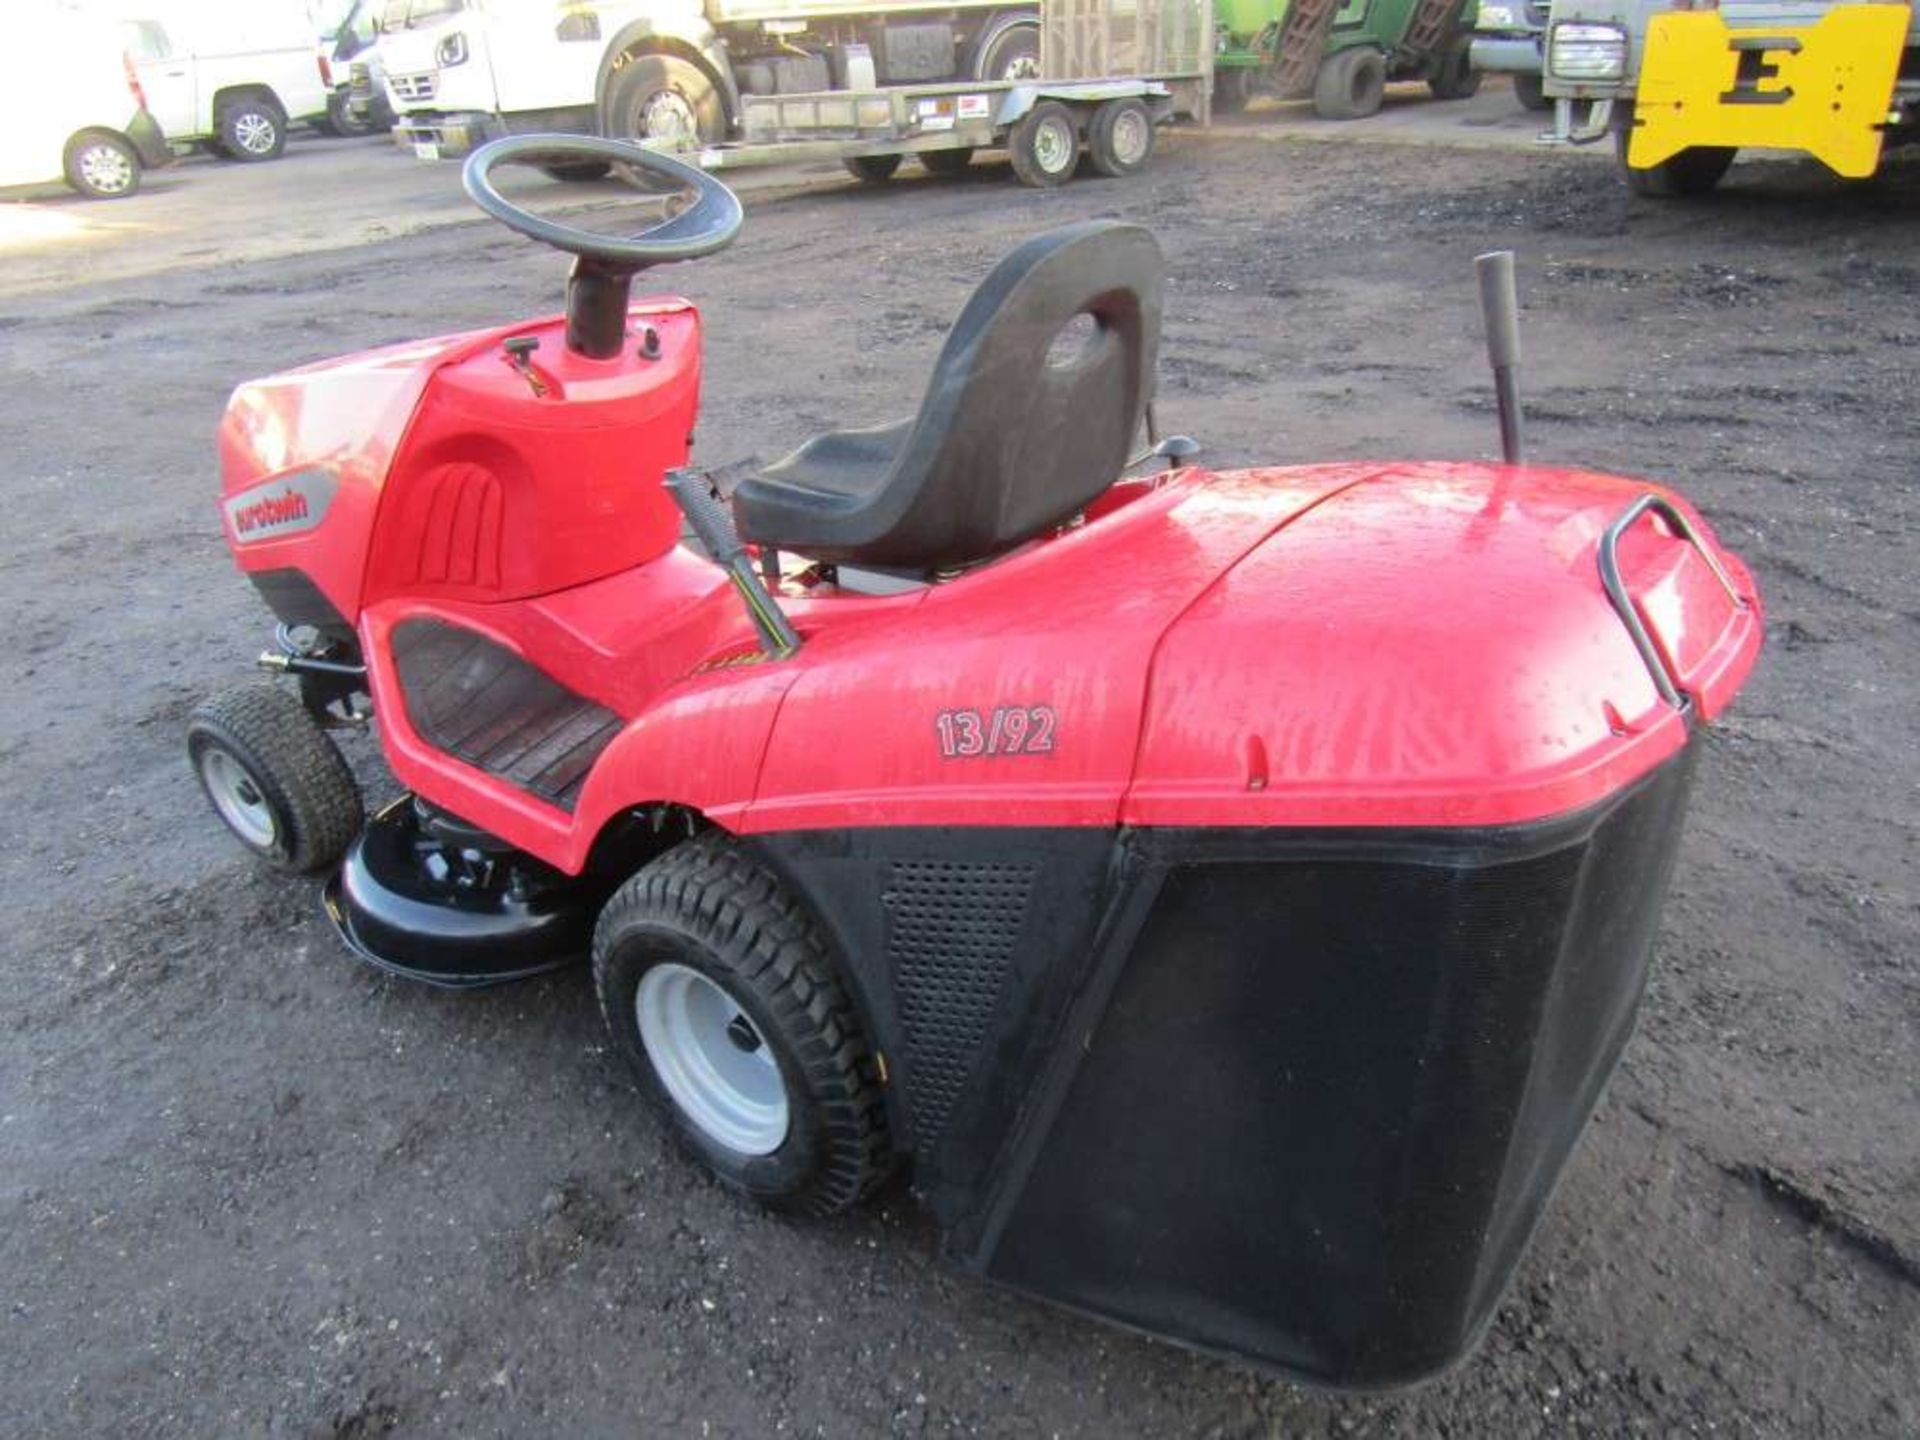 Eurotwin 13/92 Ride On Mower - Image 3 of 5